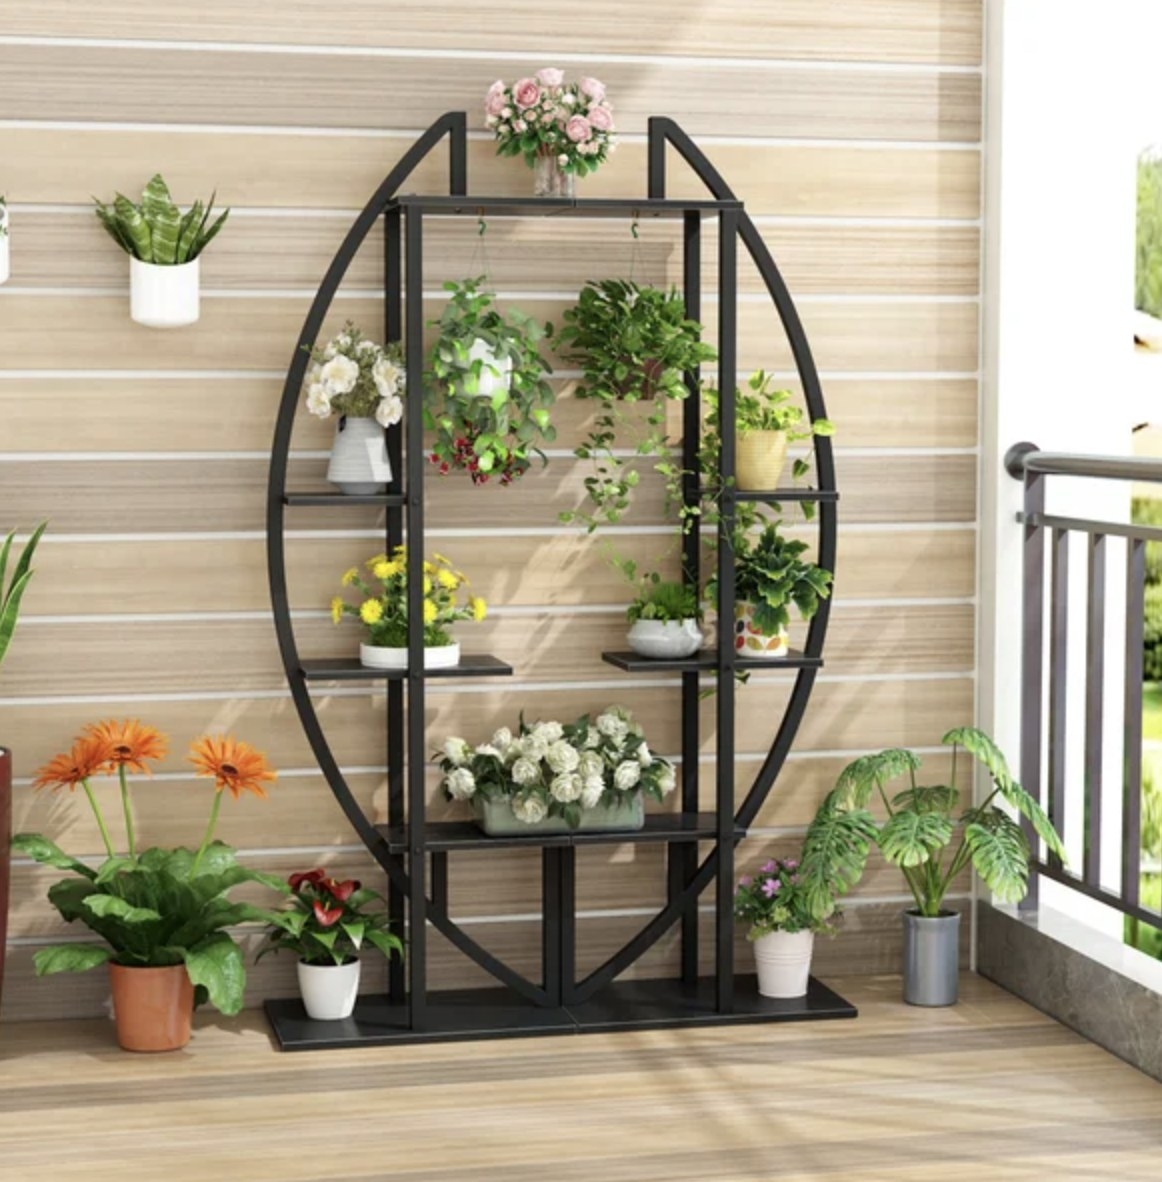 The black plant stand has multiple tiers, shelves and hooks